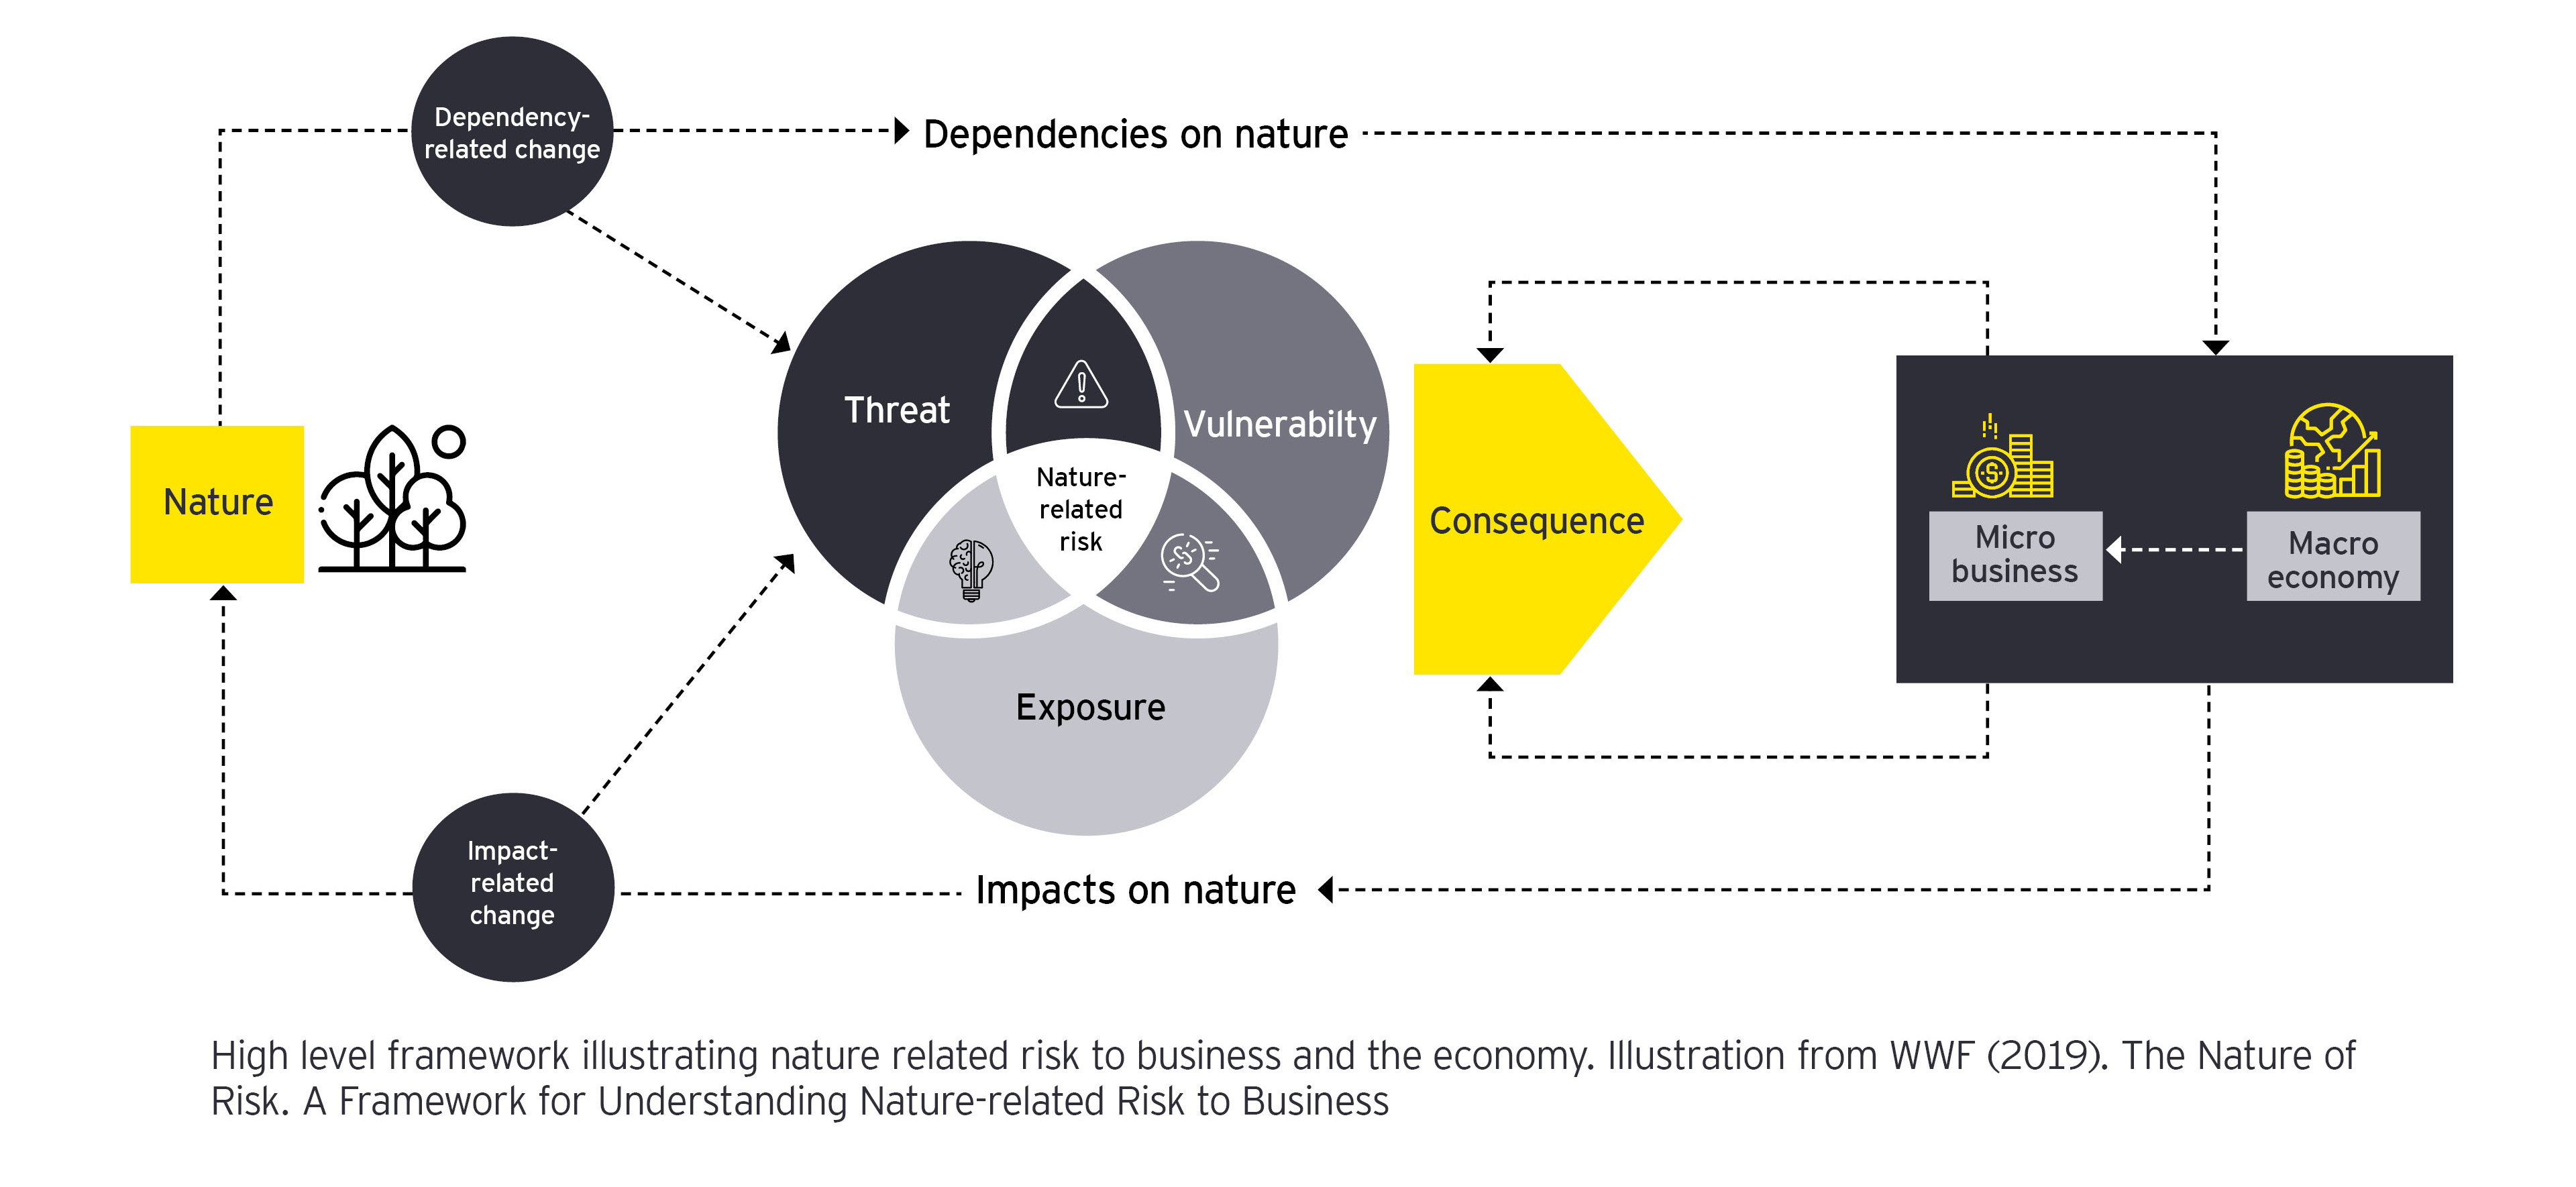 A high-level framework illustrating nature-related risk to business and the economy.